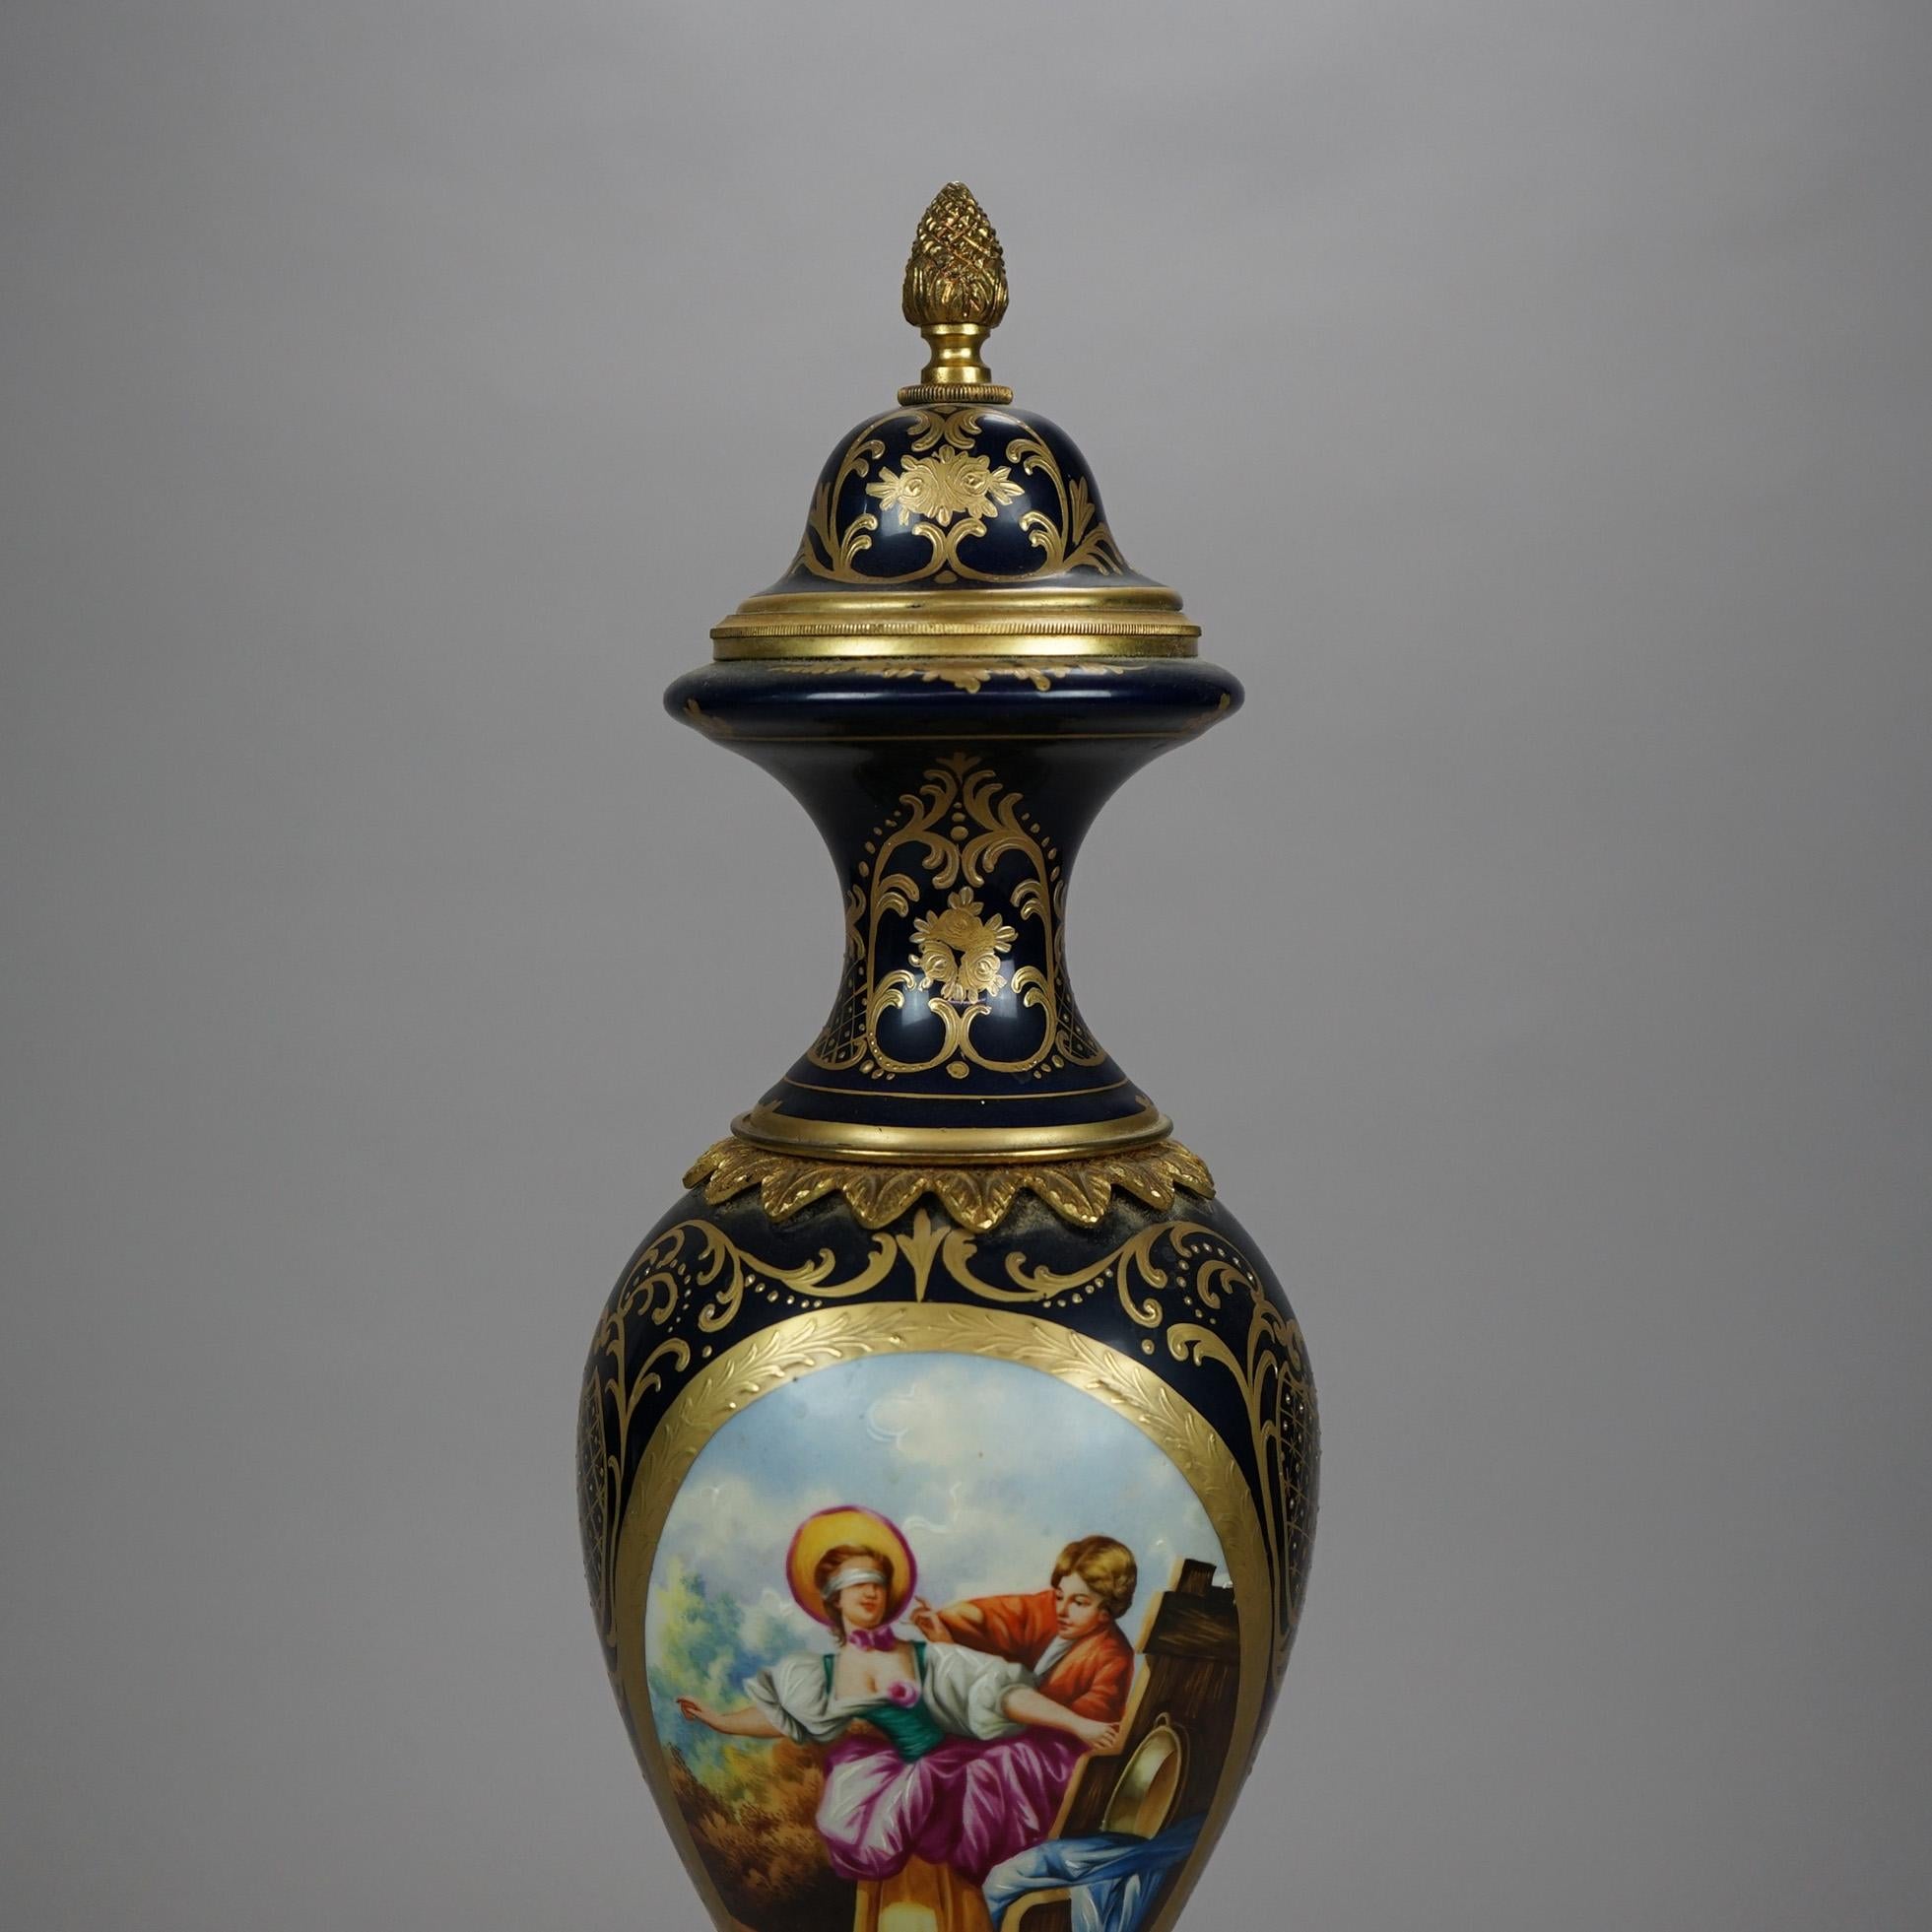 A French Sevres portrait vase offers porcelain construction in urn form with reserve having courting scene on cobalt blue ground with gilt highlights throughout, maker mark on base as photographed, 20th century

Measures- 19.25'' H x 5.5'' W x